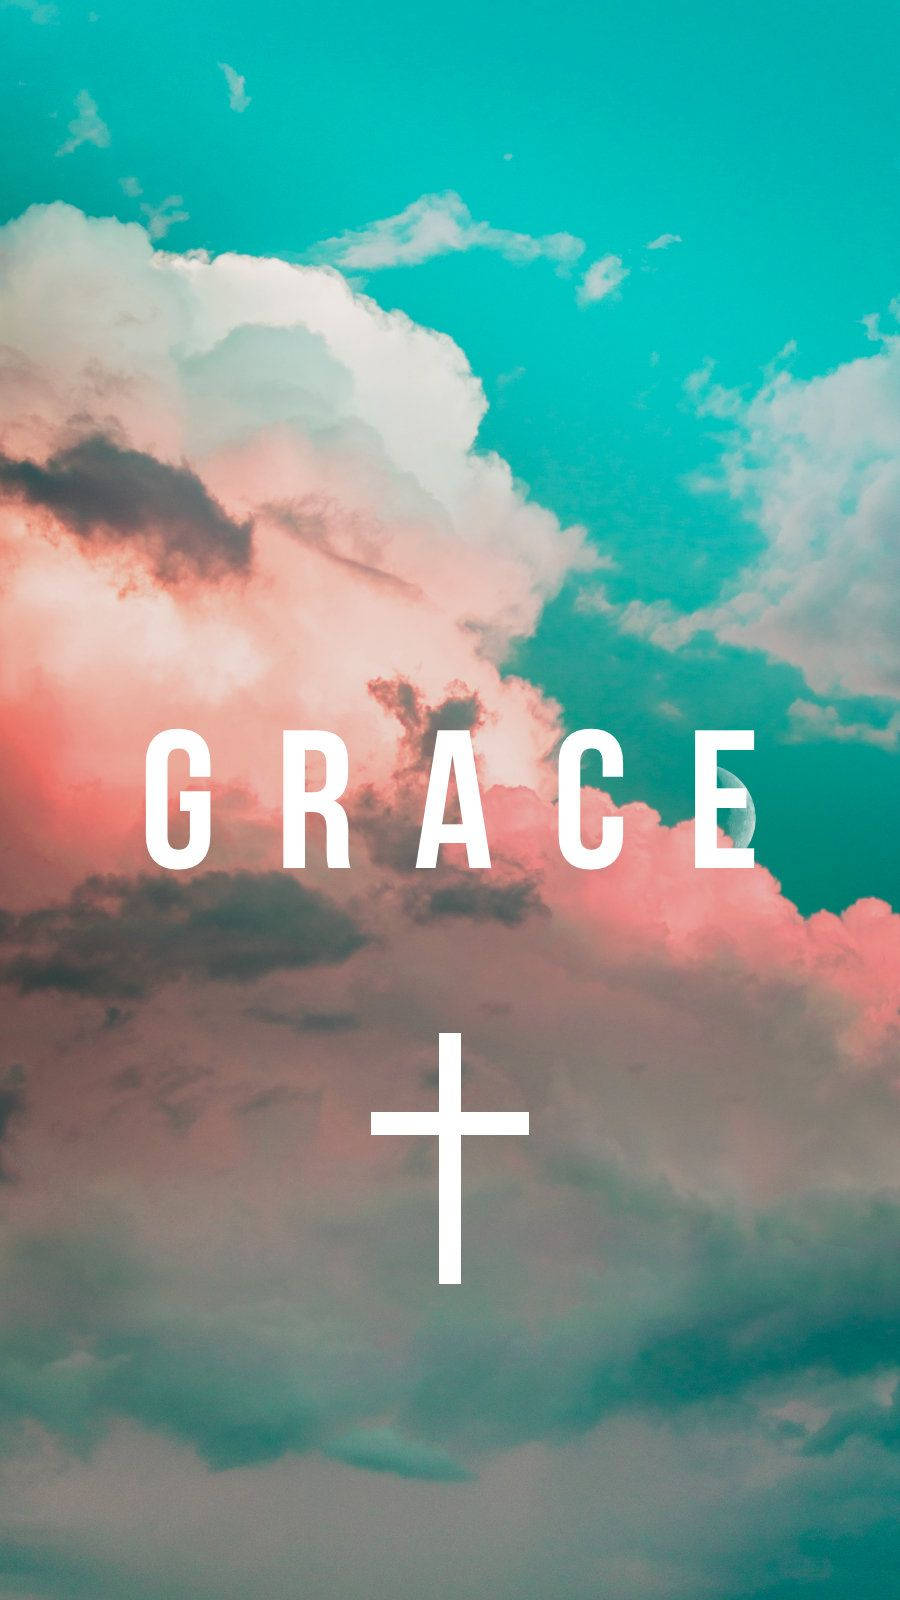 Aesthetic Christian Wallpapers (Free) for Your Phone - Lift Your Name